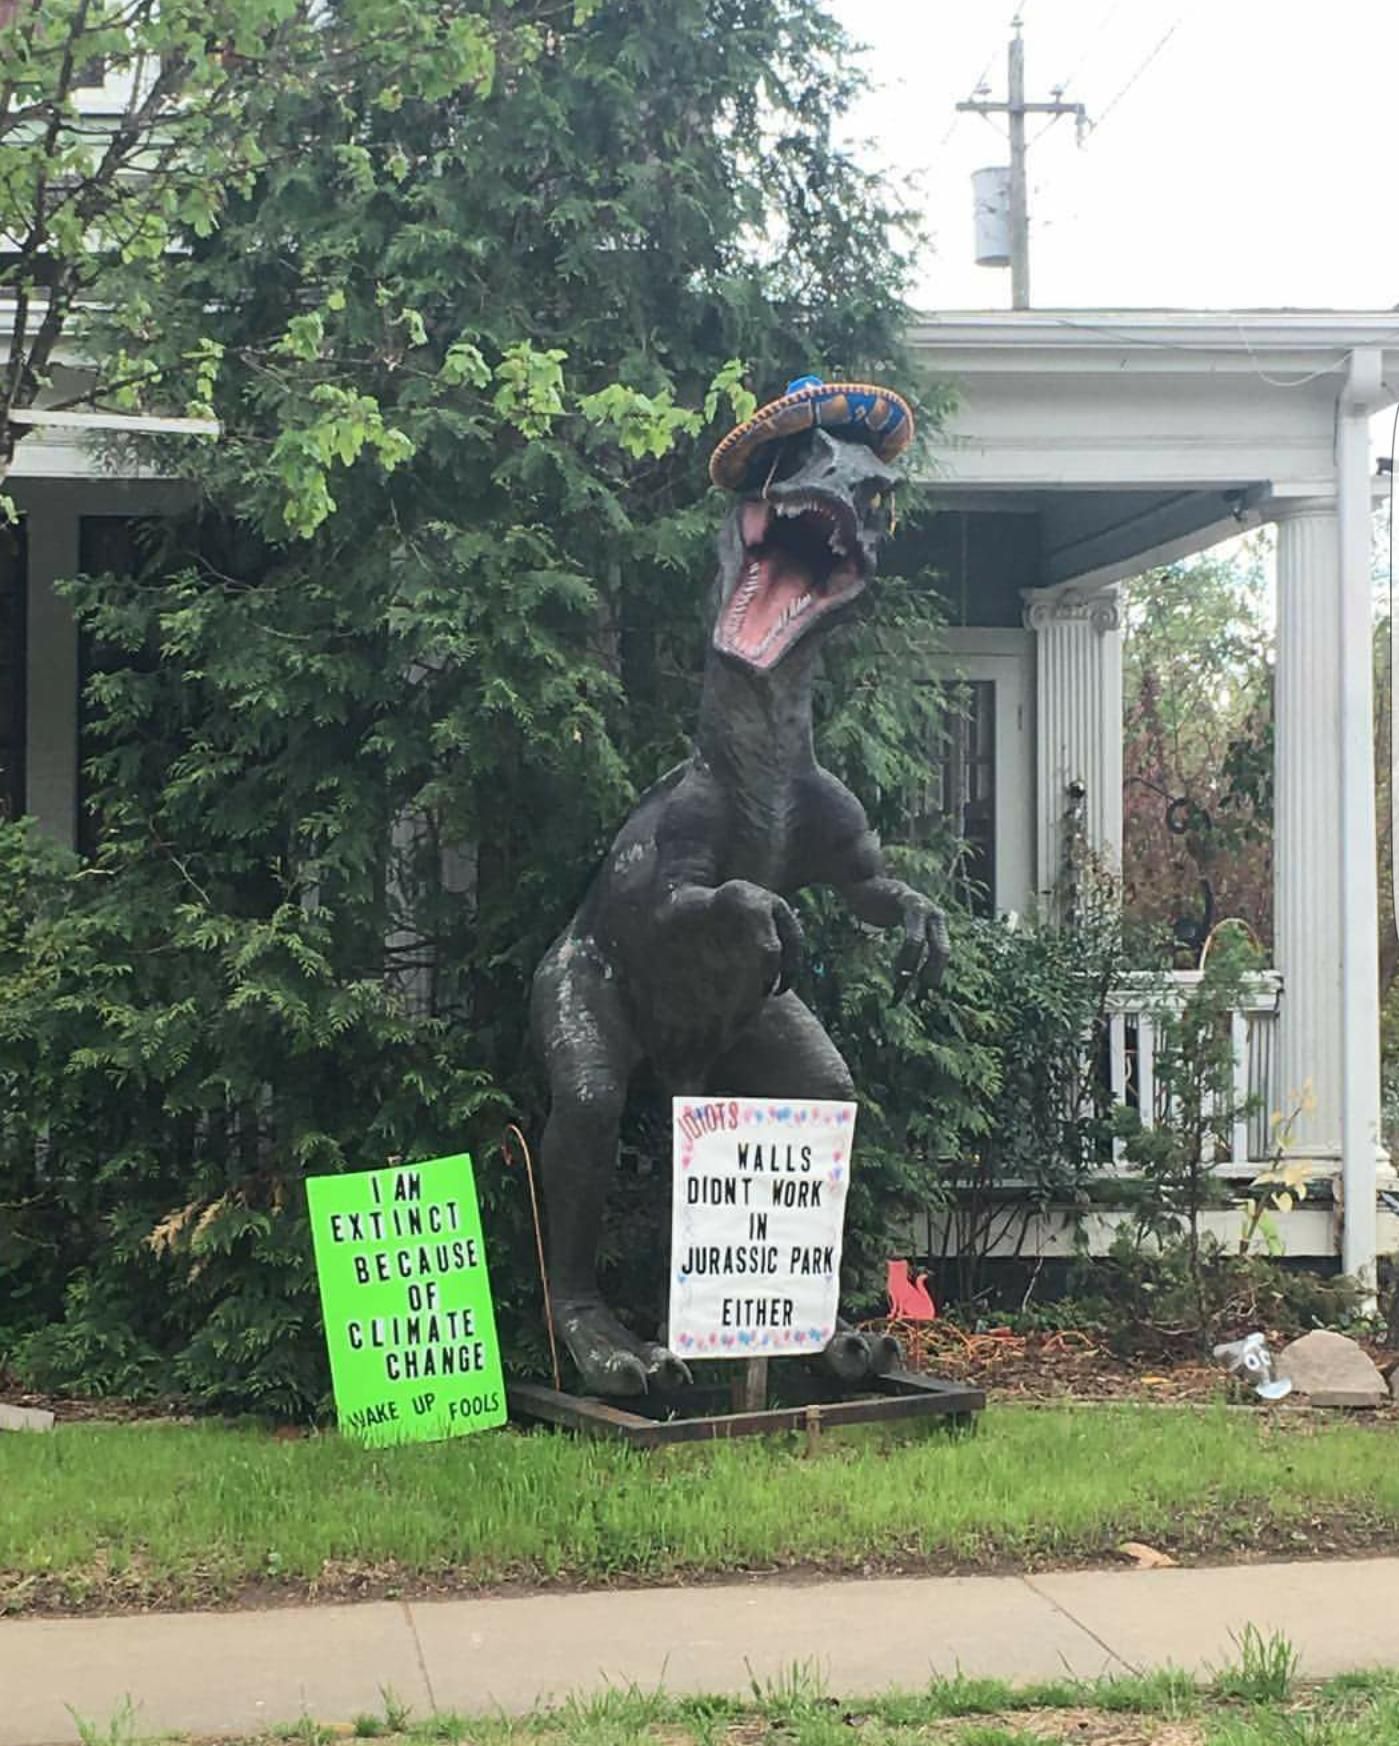 My friend found this in her neighborhood today